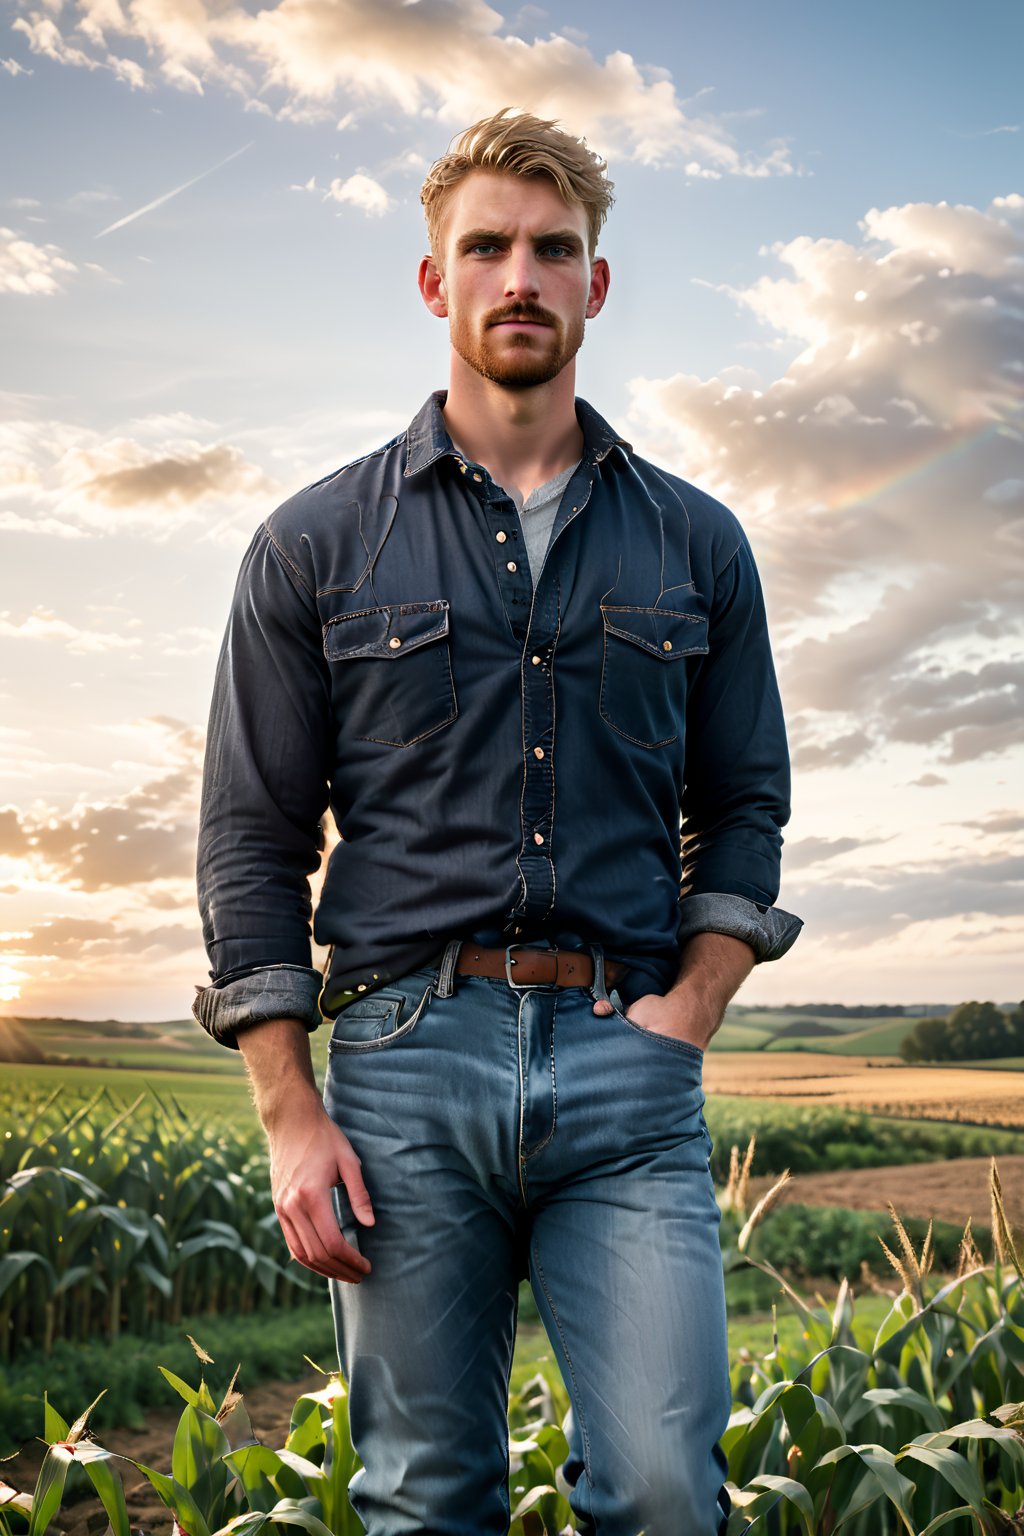 R0bbi3r0bbi3, a charming muscular tall English farmer in his late 20s, stands tall, gazing afar at the breathtaking sunset over rolling farming fields. Golden hour casts a warm glow on his rugged features: messy short hair, blonde facial hair, striking blue eyes, and a strong jawline. He wears a well-rendered red flannel with patterns, worn jeans, and heavy boots, giving off a rustic charm. His large hands:1.2, shaped by hard labor, gently grasp the rim of a worn hat as he surveys his picturesque landscape. In the soft-focused background, a motion-blurred corn cropfield stretches out, while the vibrant sky above is dotted with a rainbow, adding to the sense of serenity. The 100mm lens captures every detail, from the texture of his boots to the subtle sheen on his skin, as if frozen in time by Leica's renowned glass. A hint of film grain adds depth and authenticity to this cinematic still, evoking a sense of nostalgia and wonder.